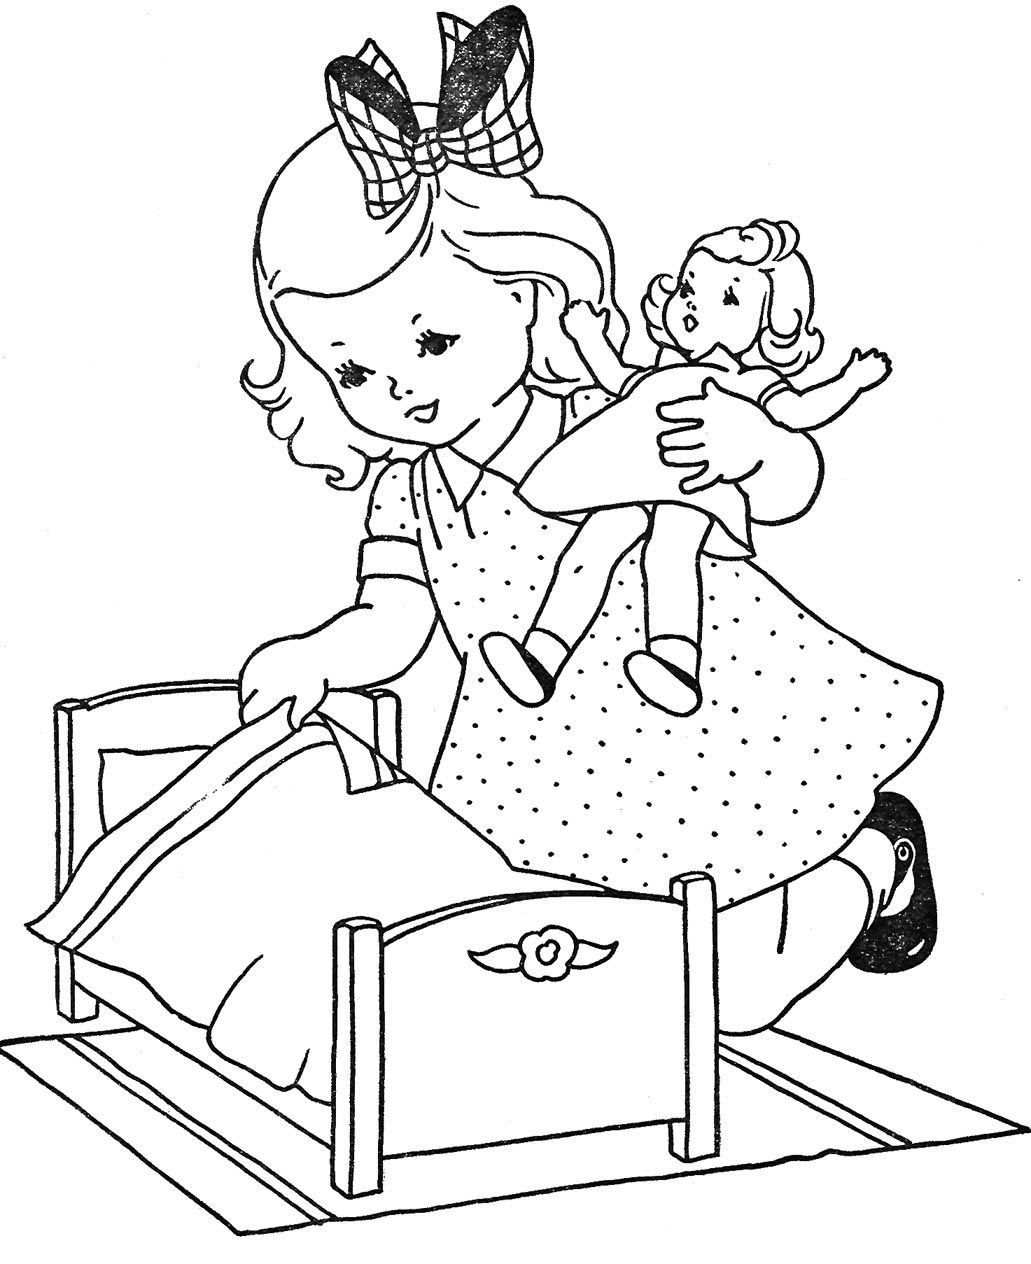 Doll Coloring Pages - Best Coloring Pages For Kids tout Greatestcoloringbook